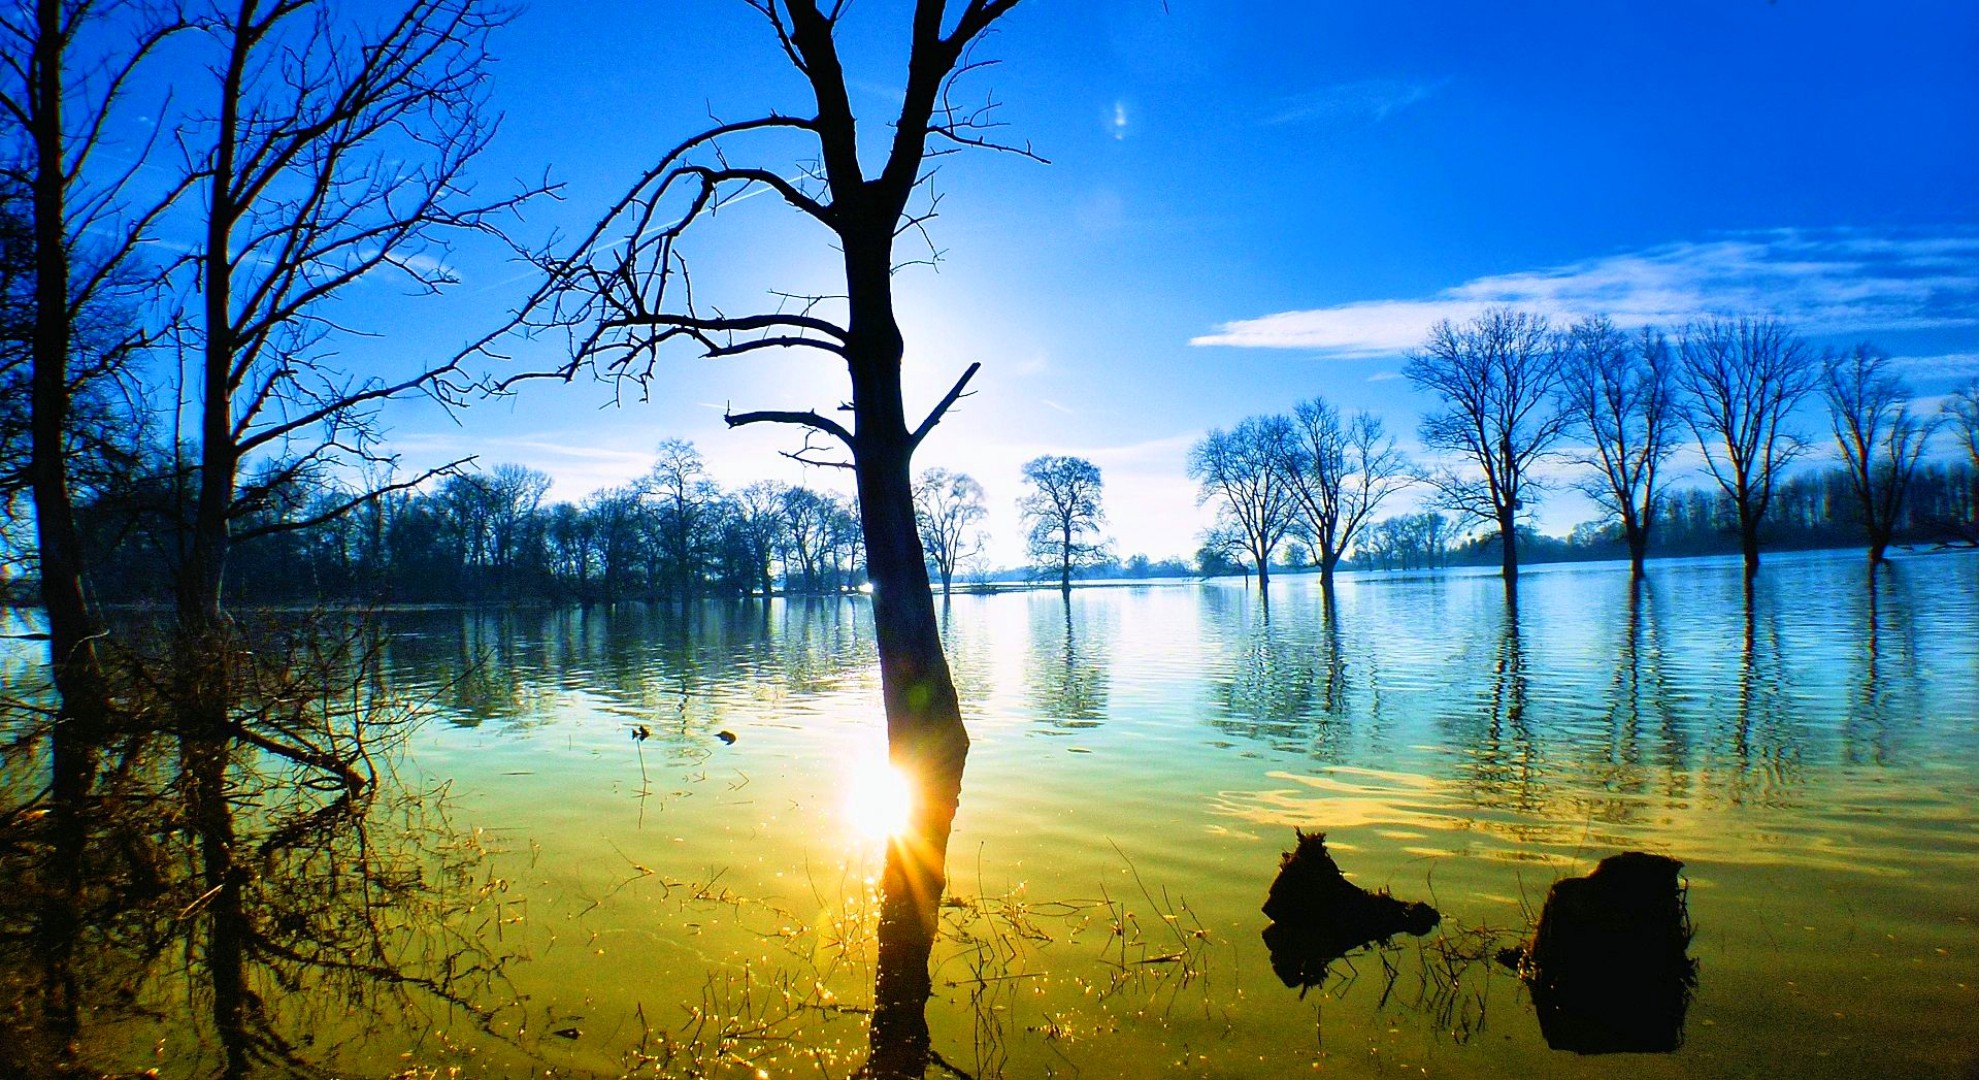 General 1979x1080 nature landscape sunset lake reflection trees water clouds calm sunlight lens flare